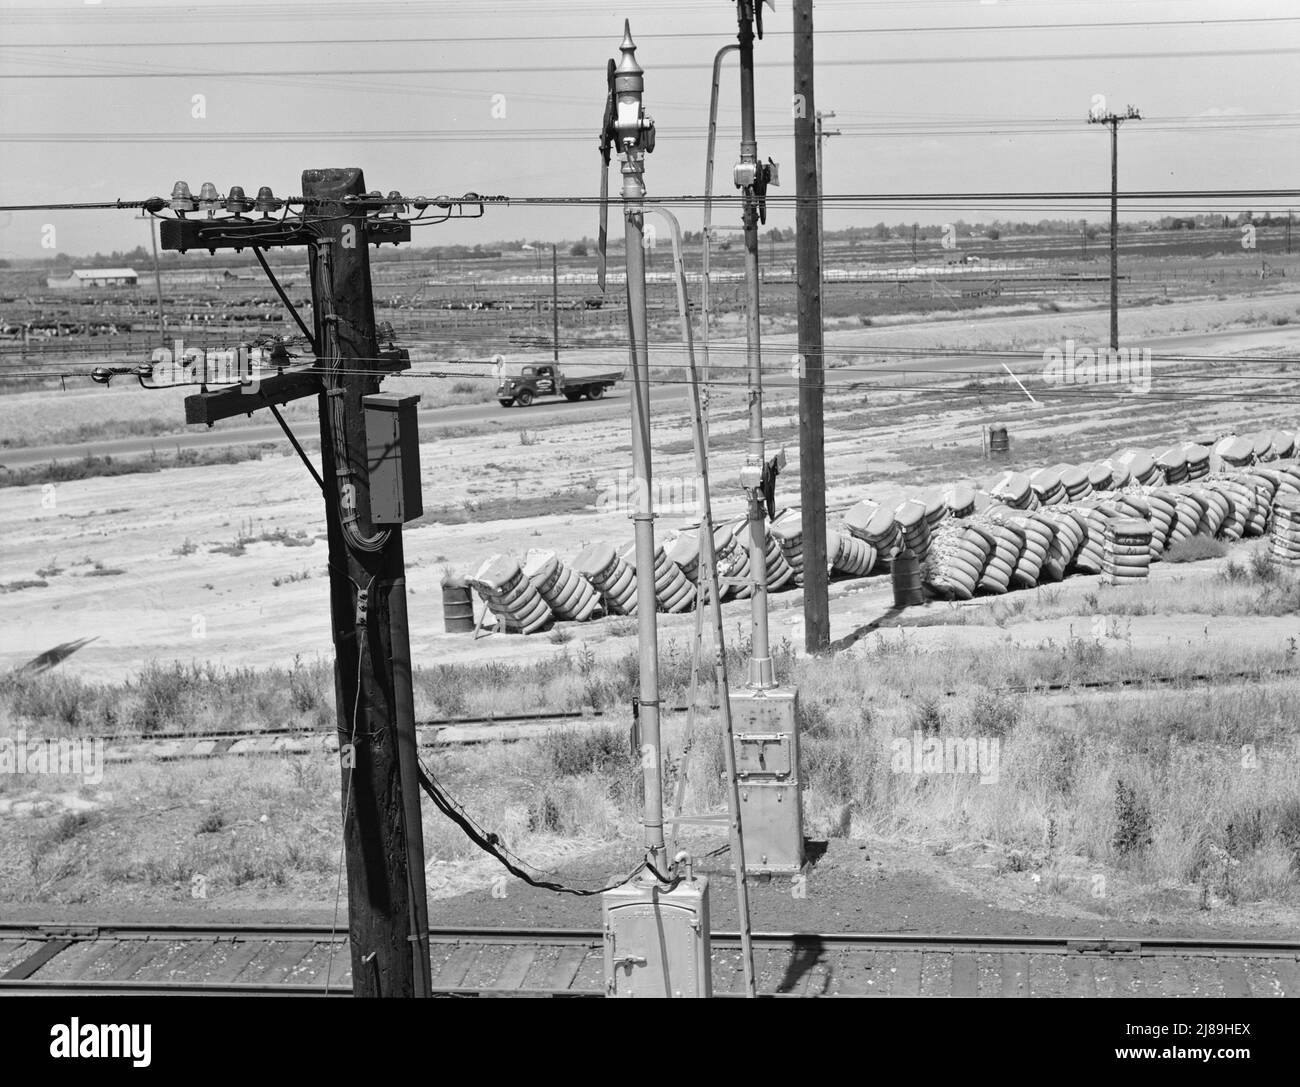 Between Tulare and Fresno, California. From the overpass approaching Fresno. [Bales of cotton outside the Producers Cotton Oil Co., makers of cottonseed cake and meal for cattle and sheep]. Stock Photo